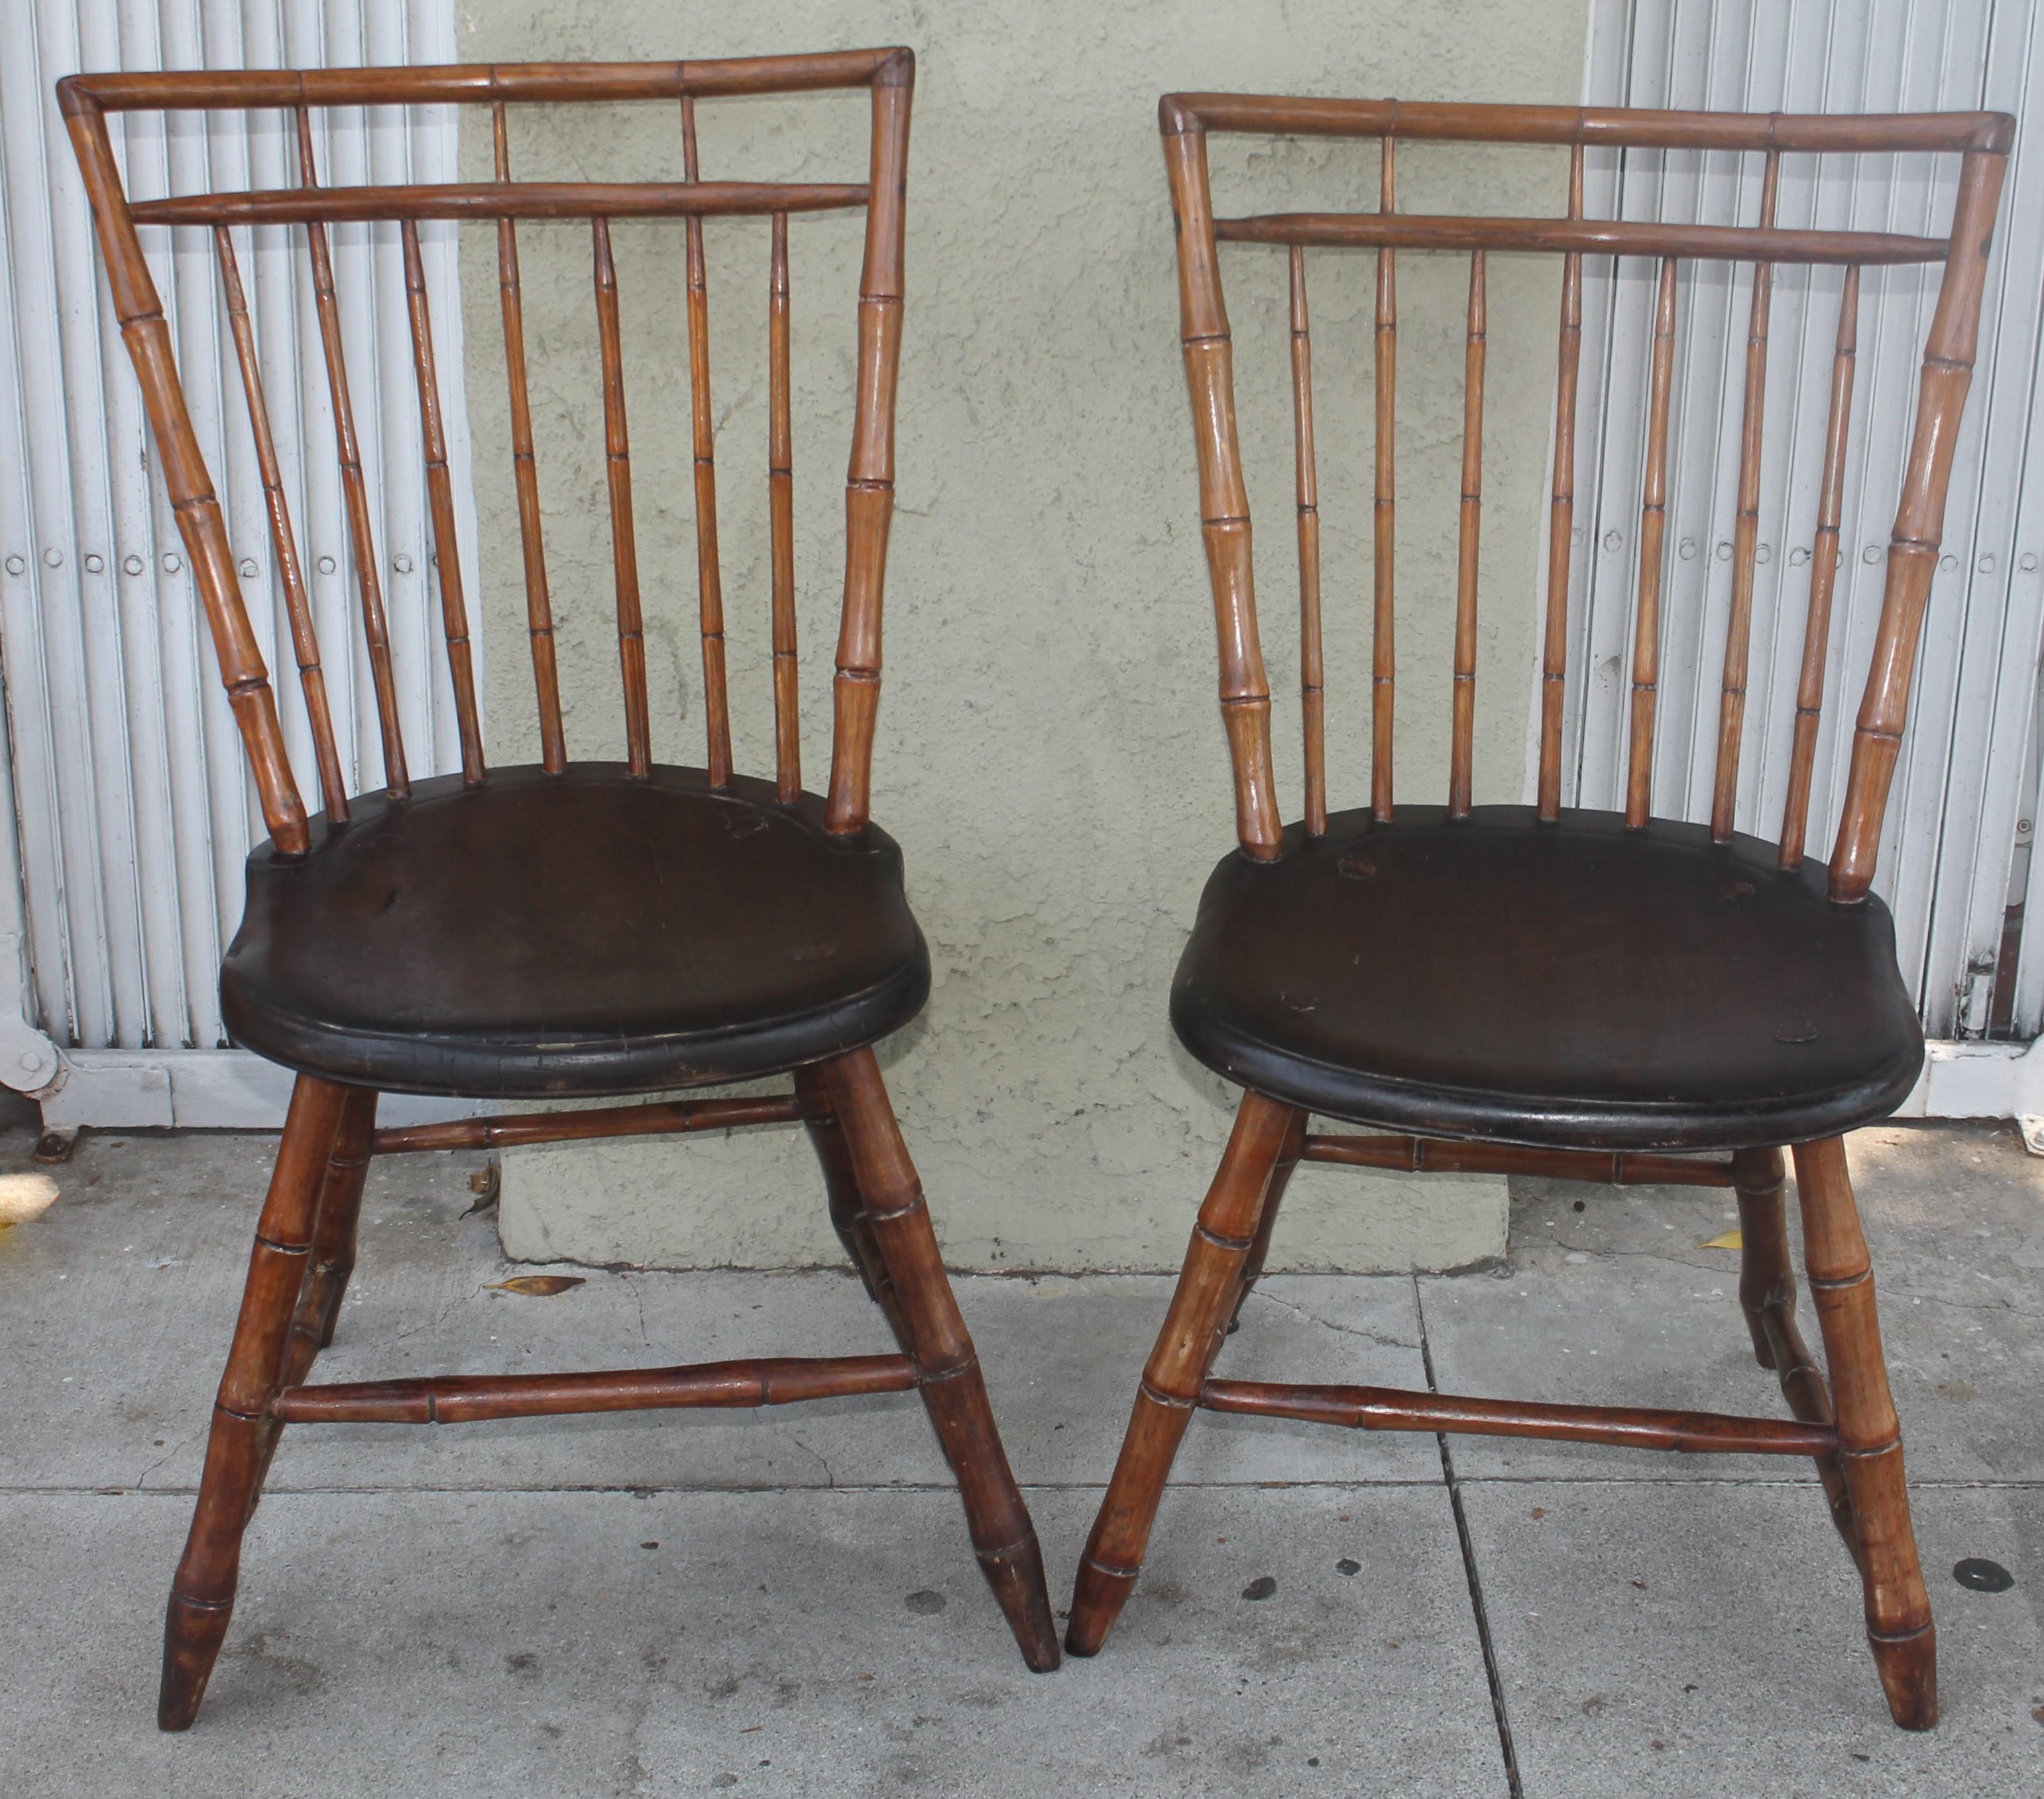 These amazing bamboo turnings Windsor chairs were found in Pennsylvania and are in fine sturdy condition. Fantastic plank seats and wonderful aged patina. All peg and early cut nail construction.